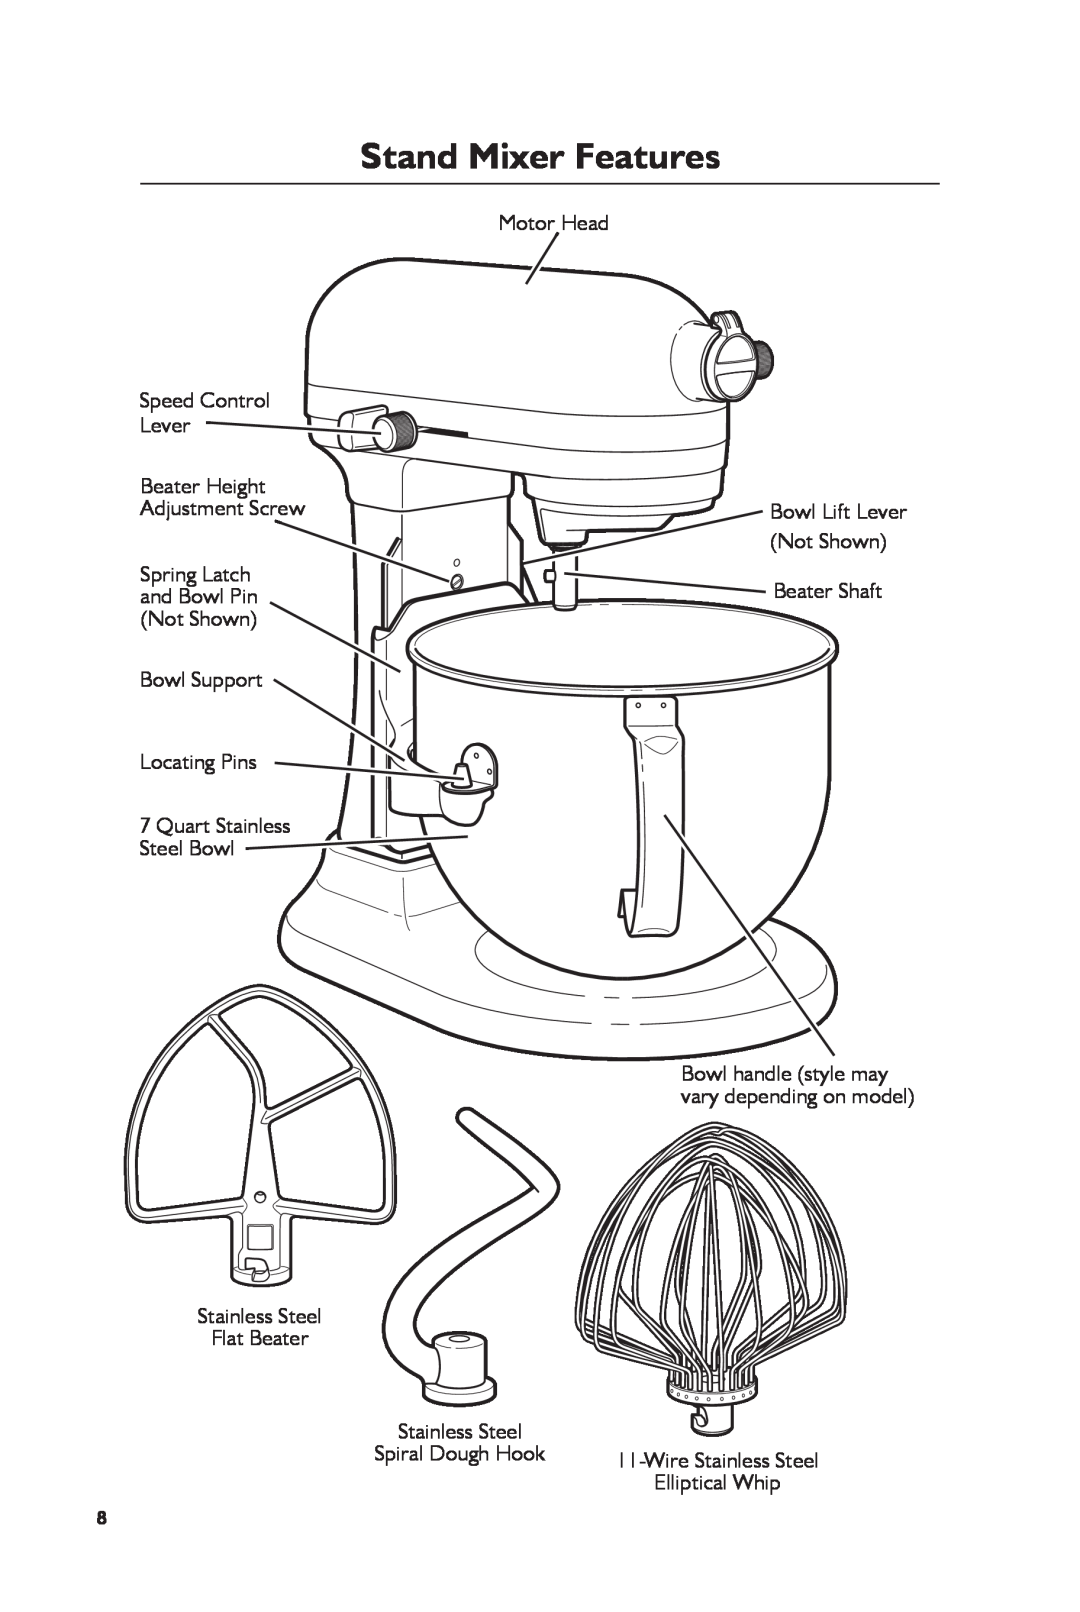 KitchenAid KSM7990 Stand Mixer Features, Bowl Lift Lever, Bowl handle style may vary depending on model, Spiral Dough Hook 